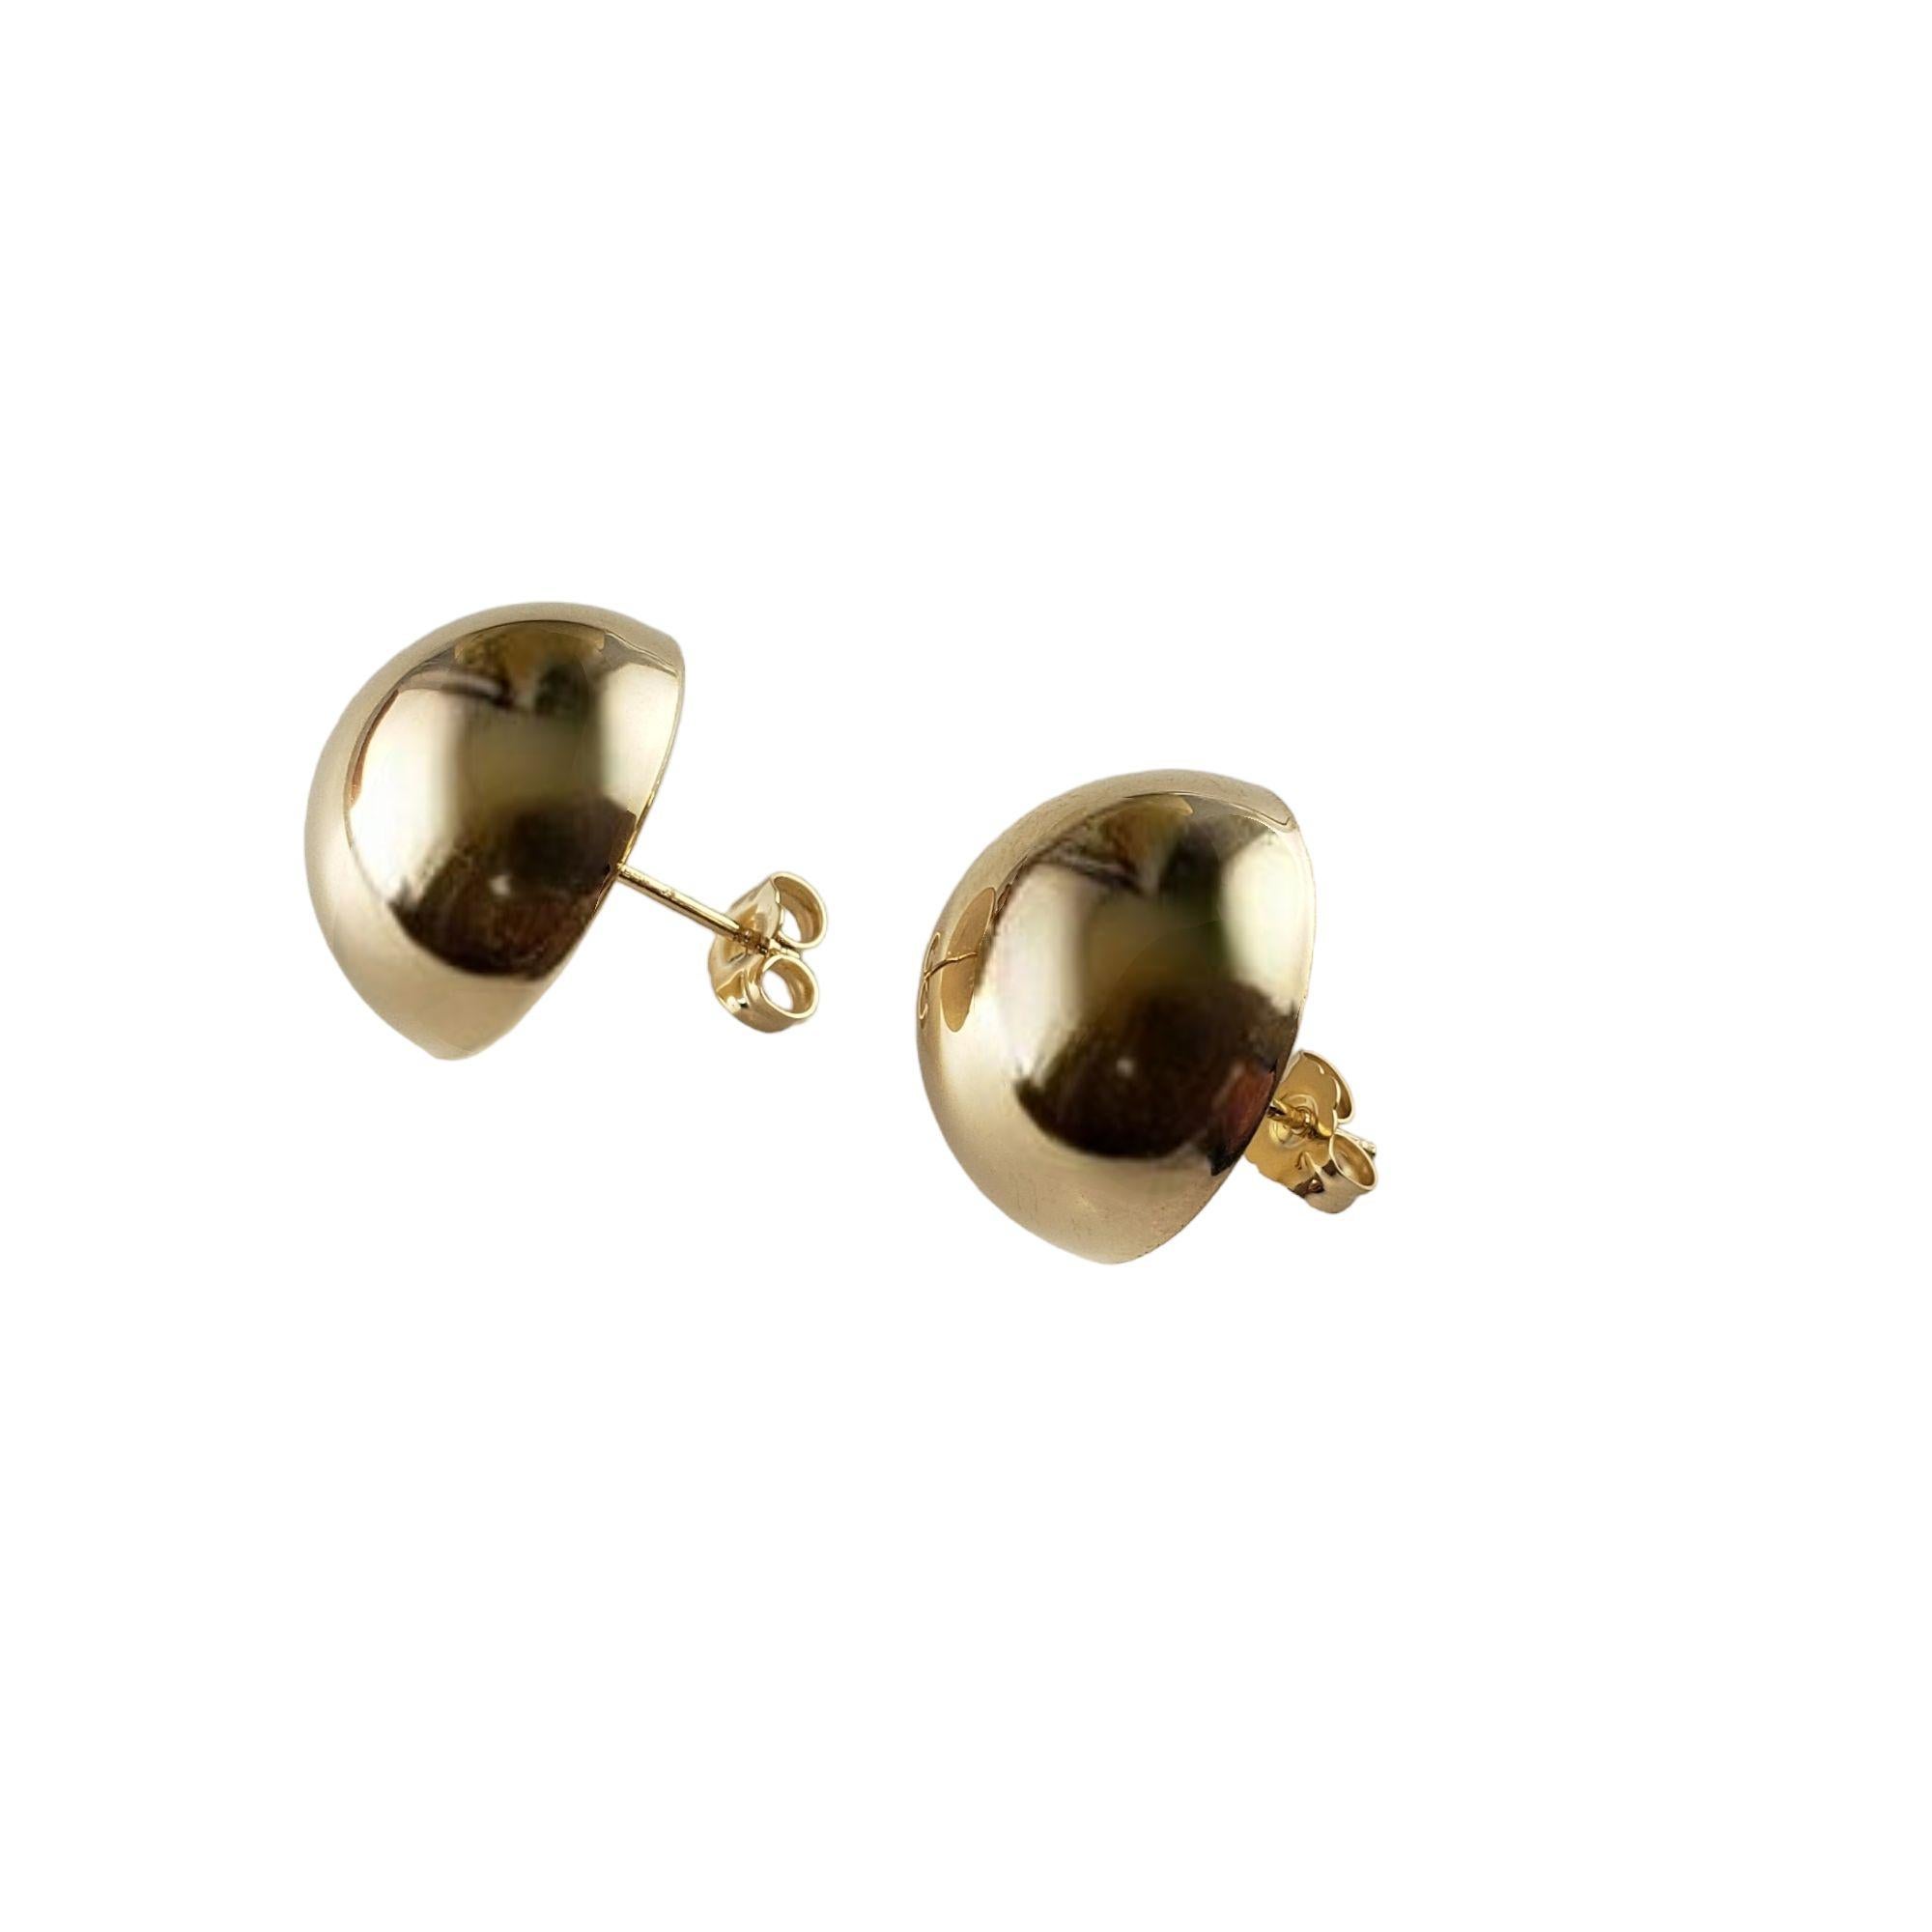 These elegant button earrings are crafted in meticulously detailed 14K yellow gold.  Push back closures.

Size:  18 mm

Weight:  4.3 gr./  2.7 dwt.

Stamped:  585  14K

Very good condition, professionally polished.

Will come packaged in a gift box